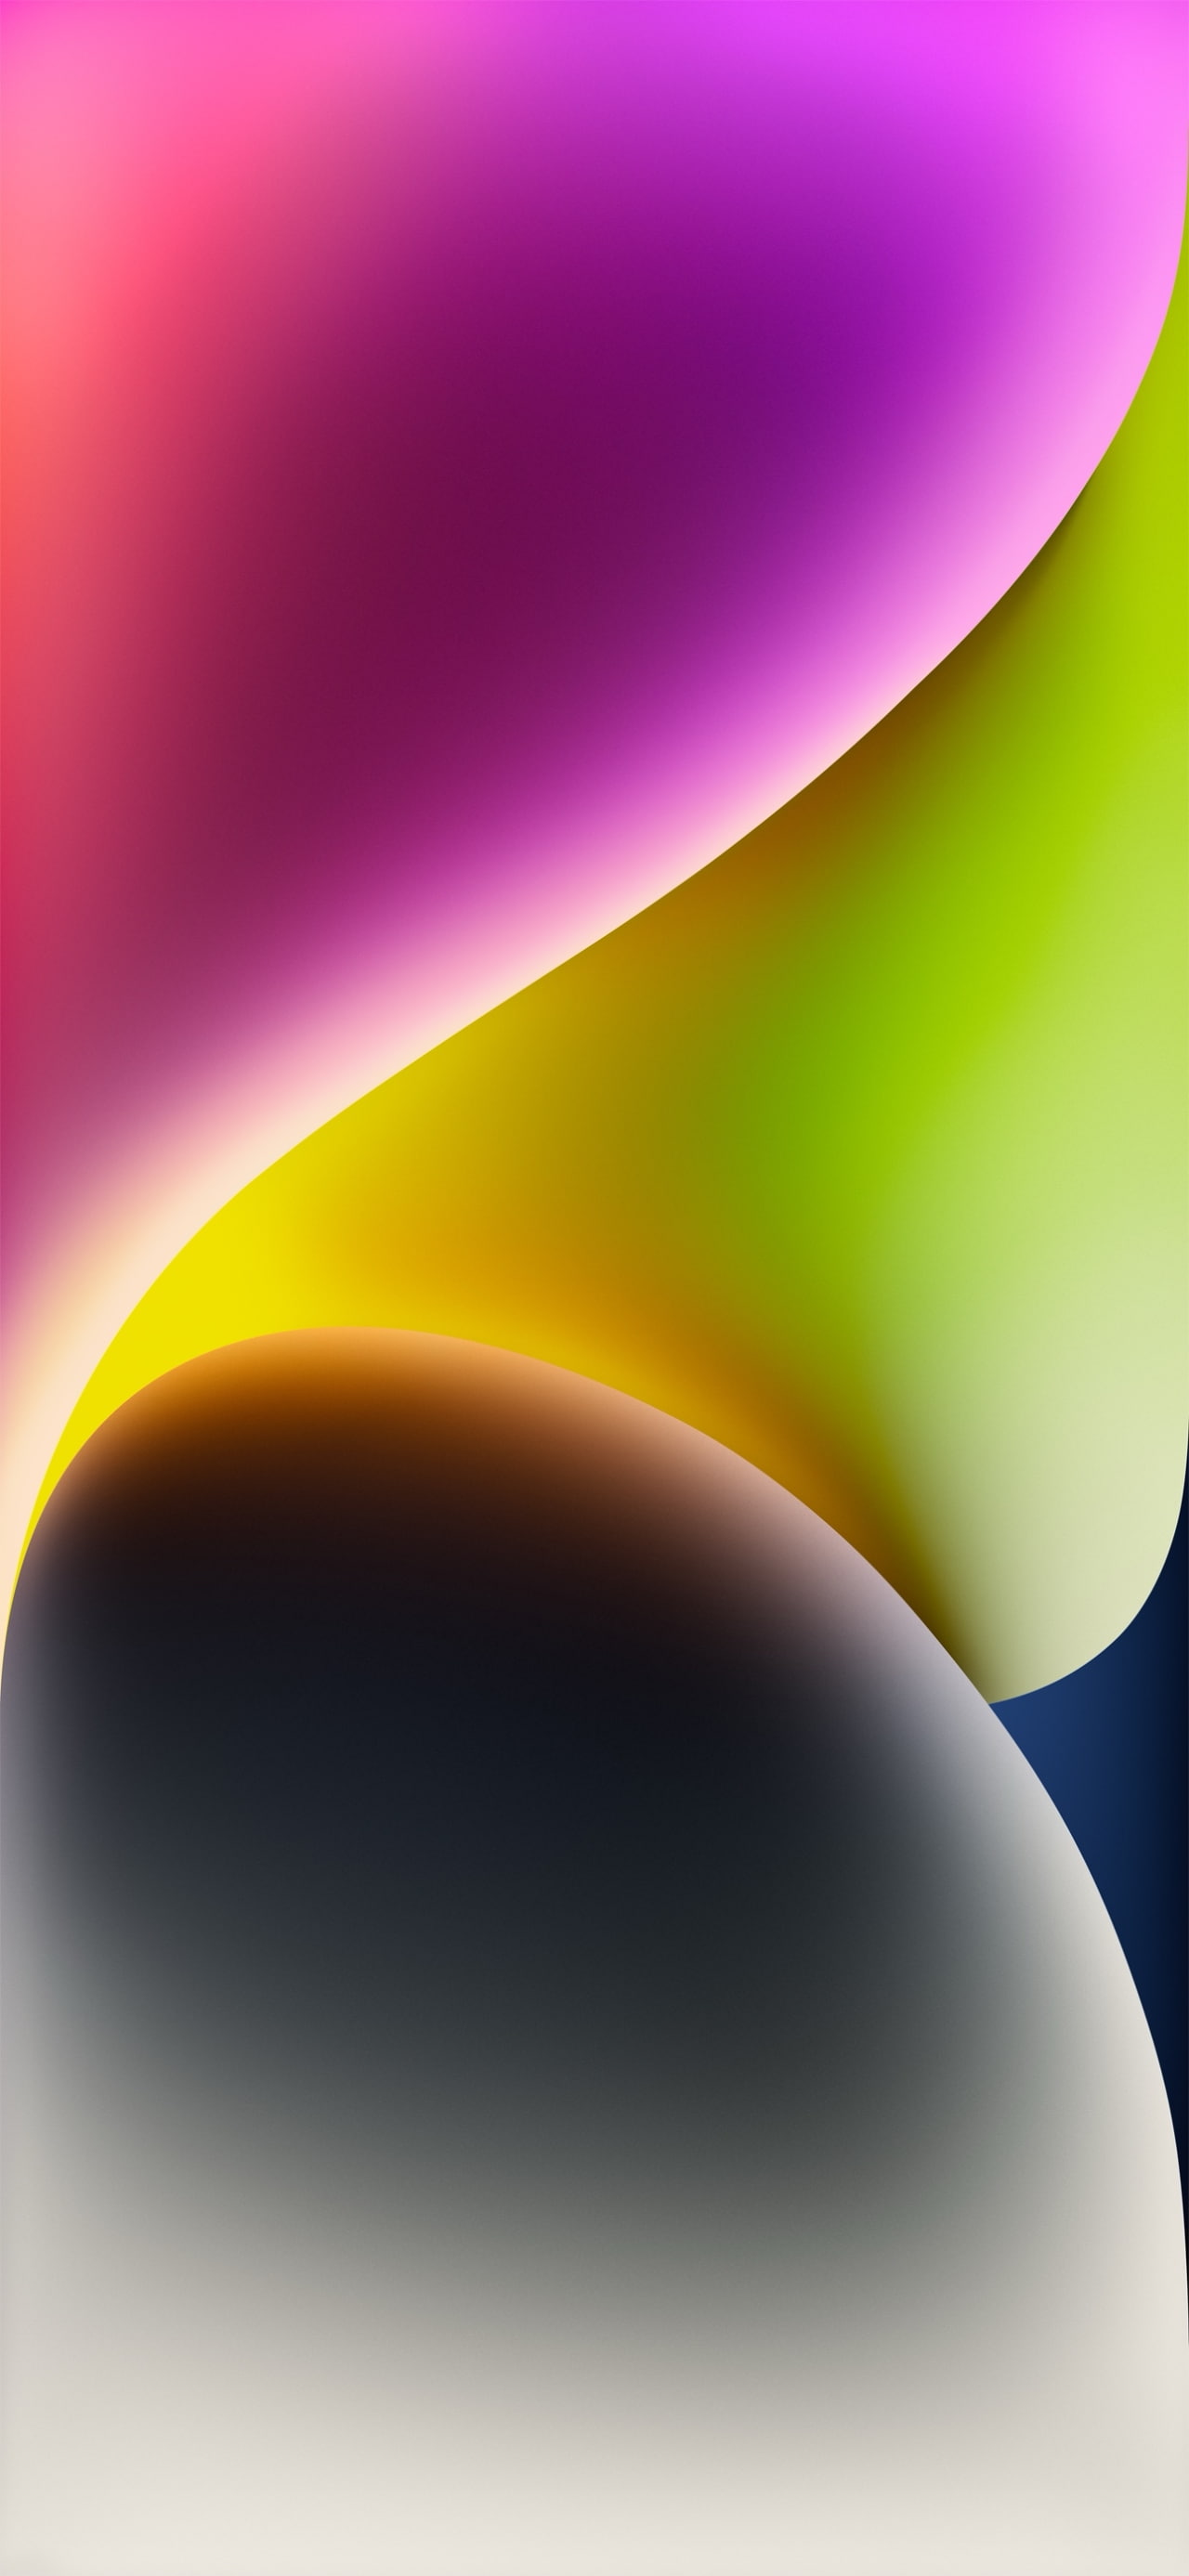 iPhone 14 Wallpapers Are Now Up For Grabs